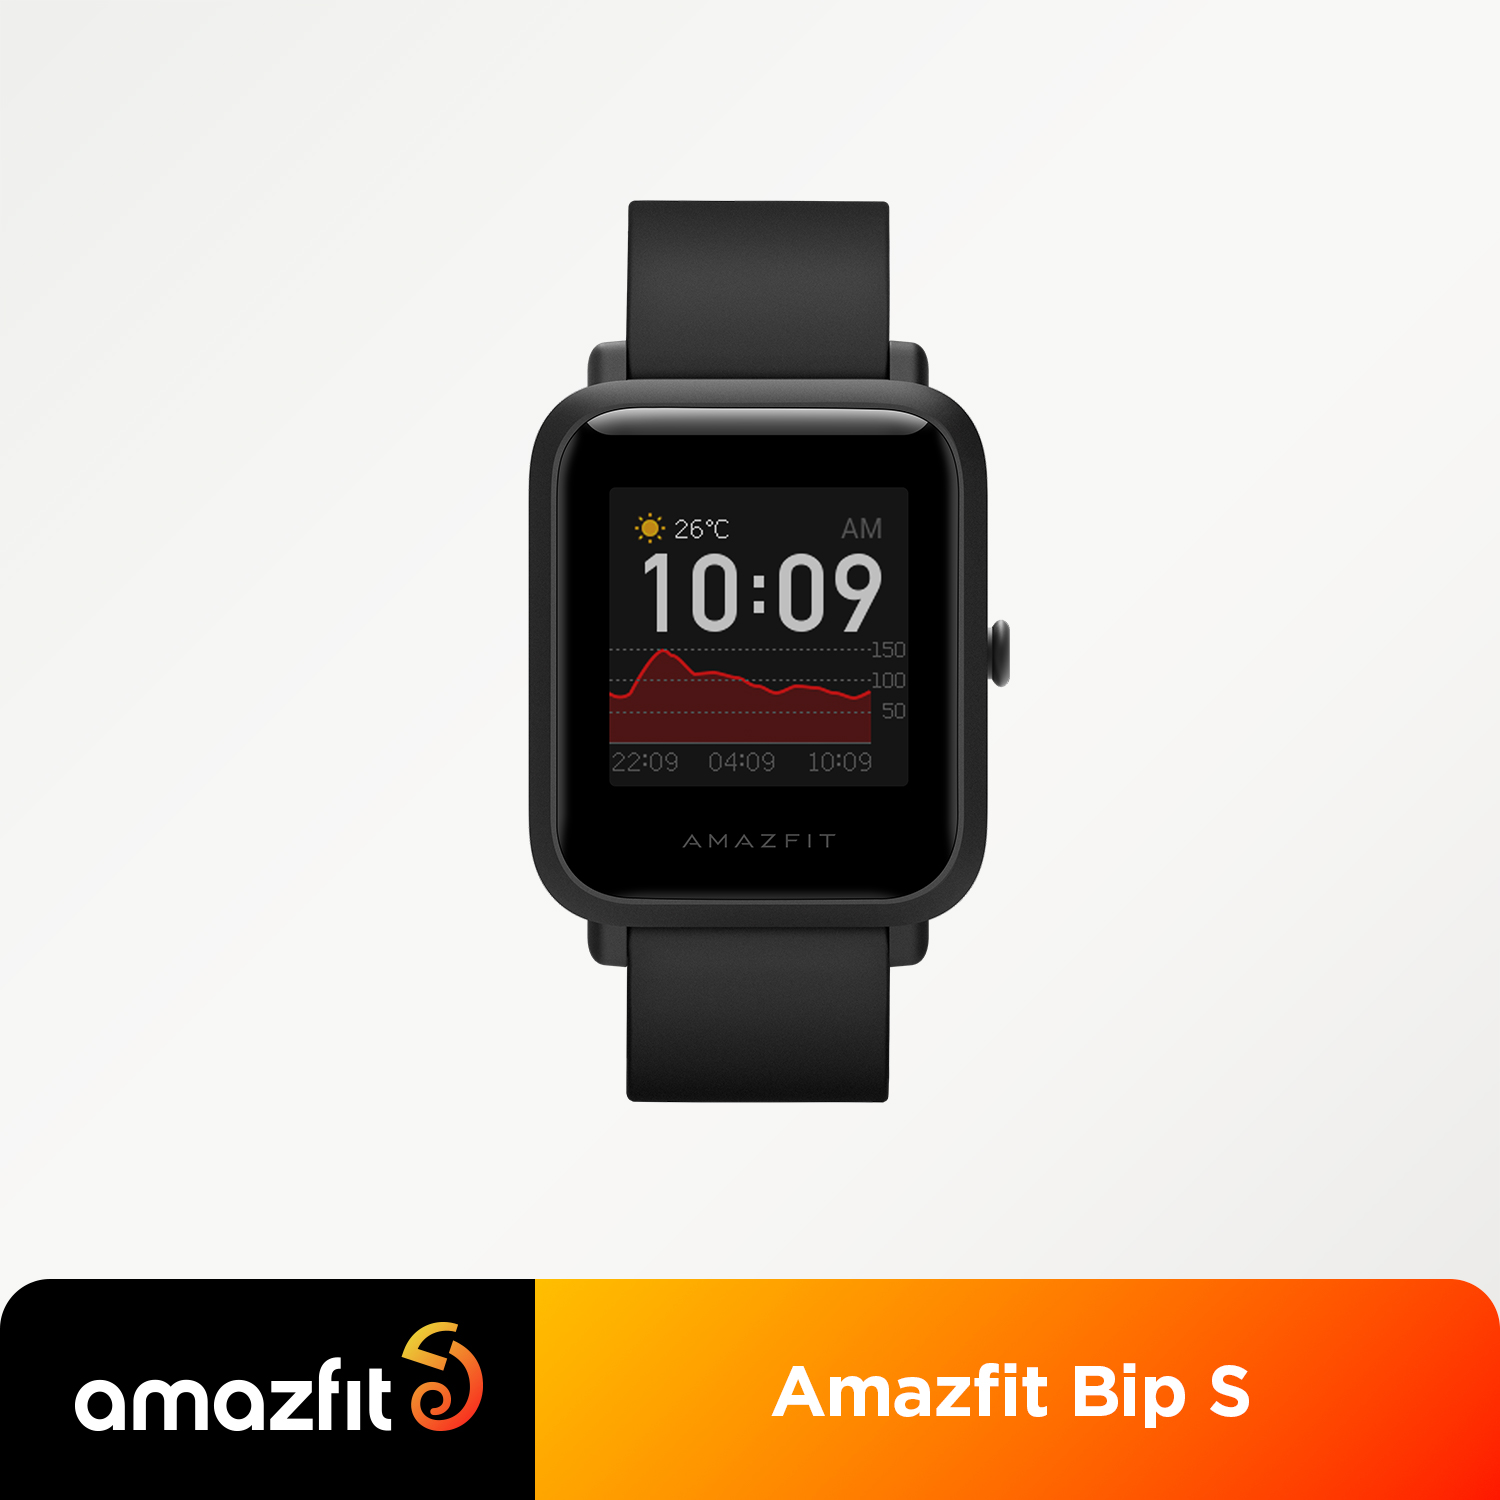 

In stock Amazfit Bip S Global Version Smartwatch 5ATM GPS GLONASS Smart Watch for android iOS Phone, White